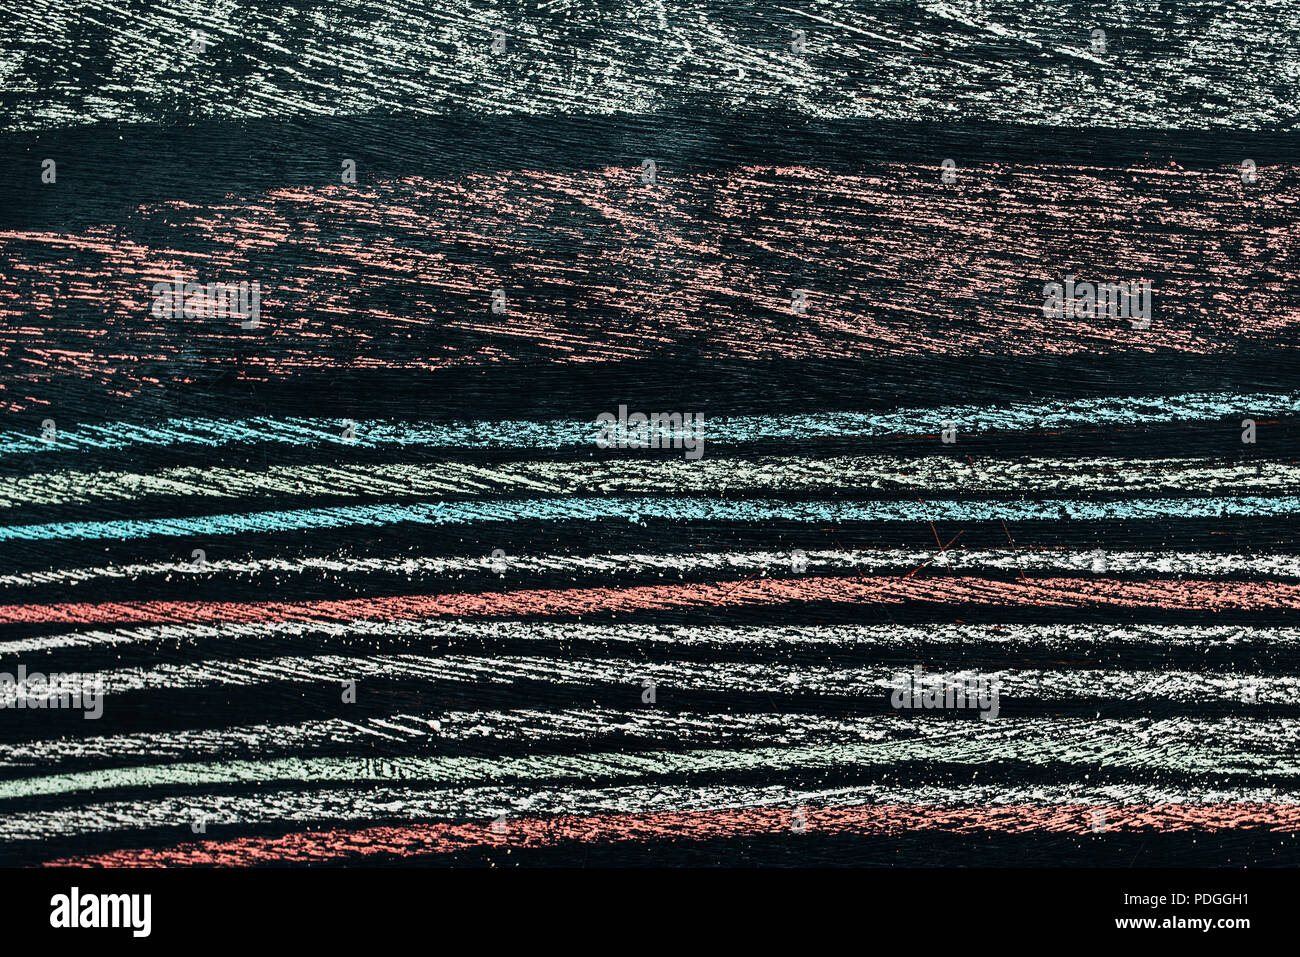 Colorful chalk striped pattern on school blackboard, close up of abstract grunge texture Stock Photo